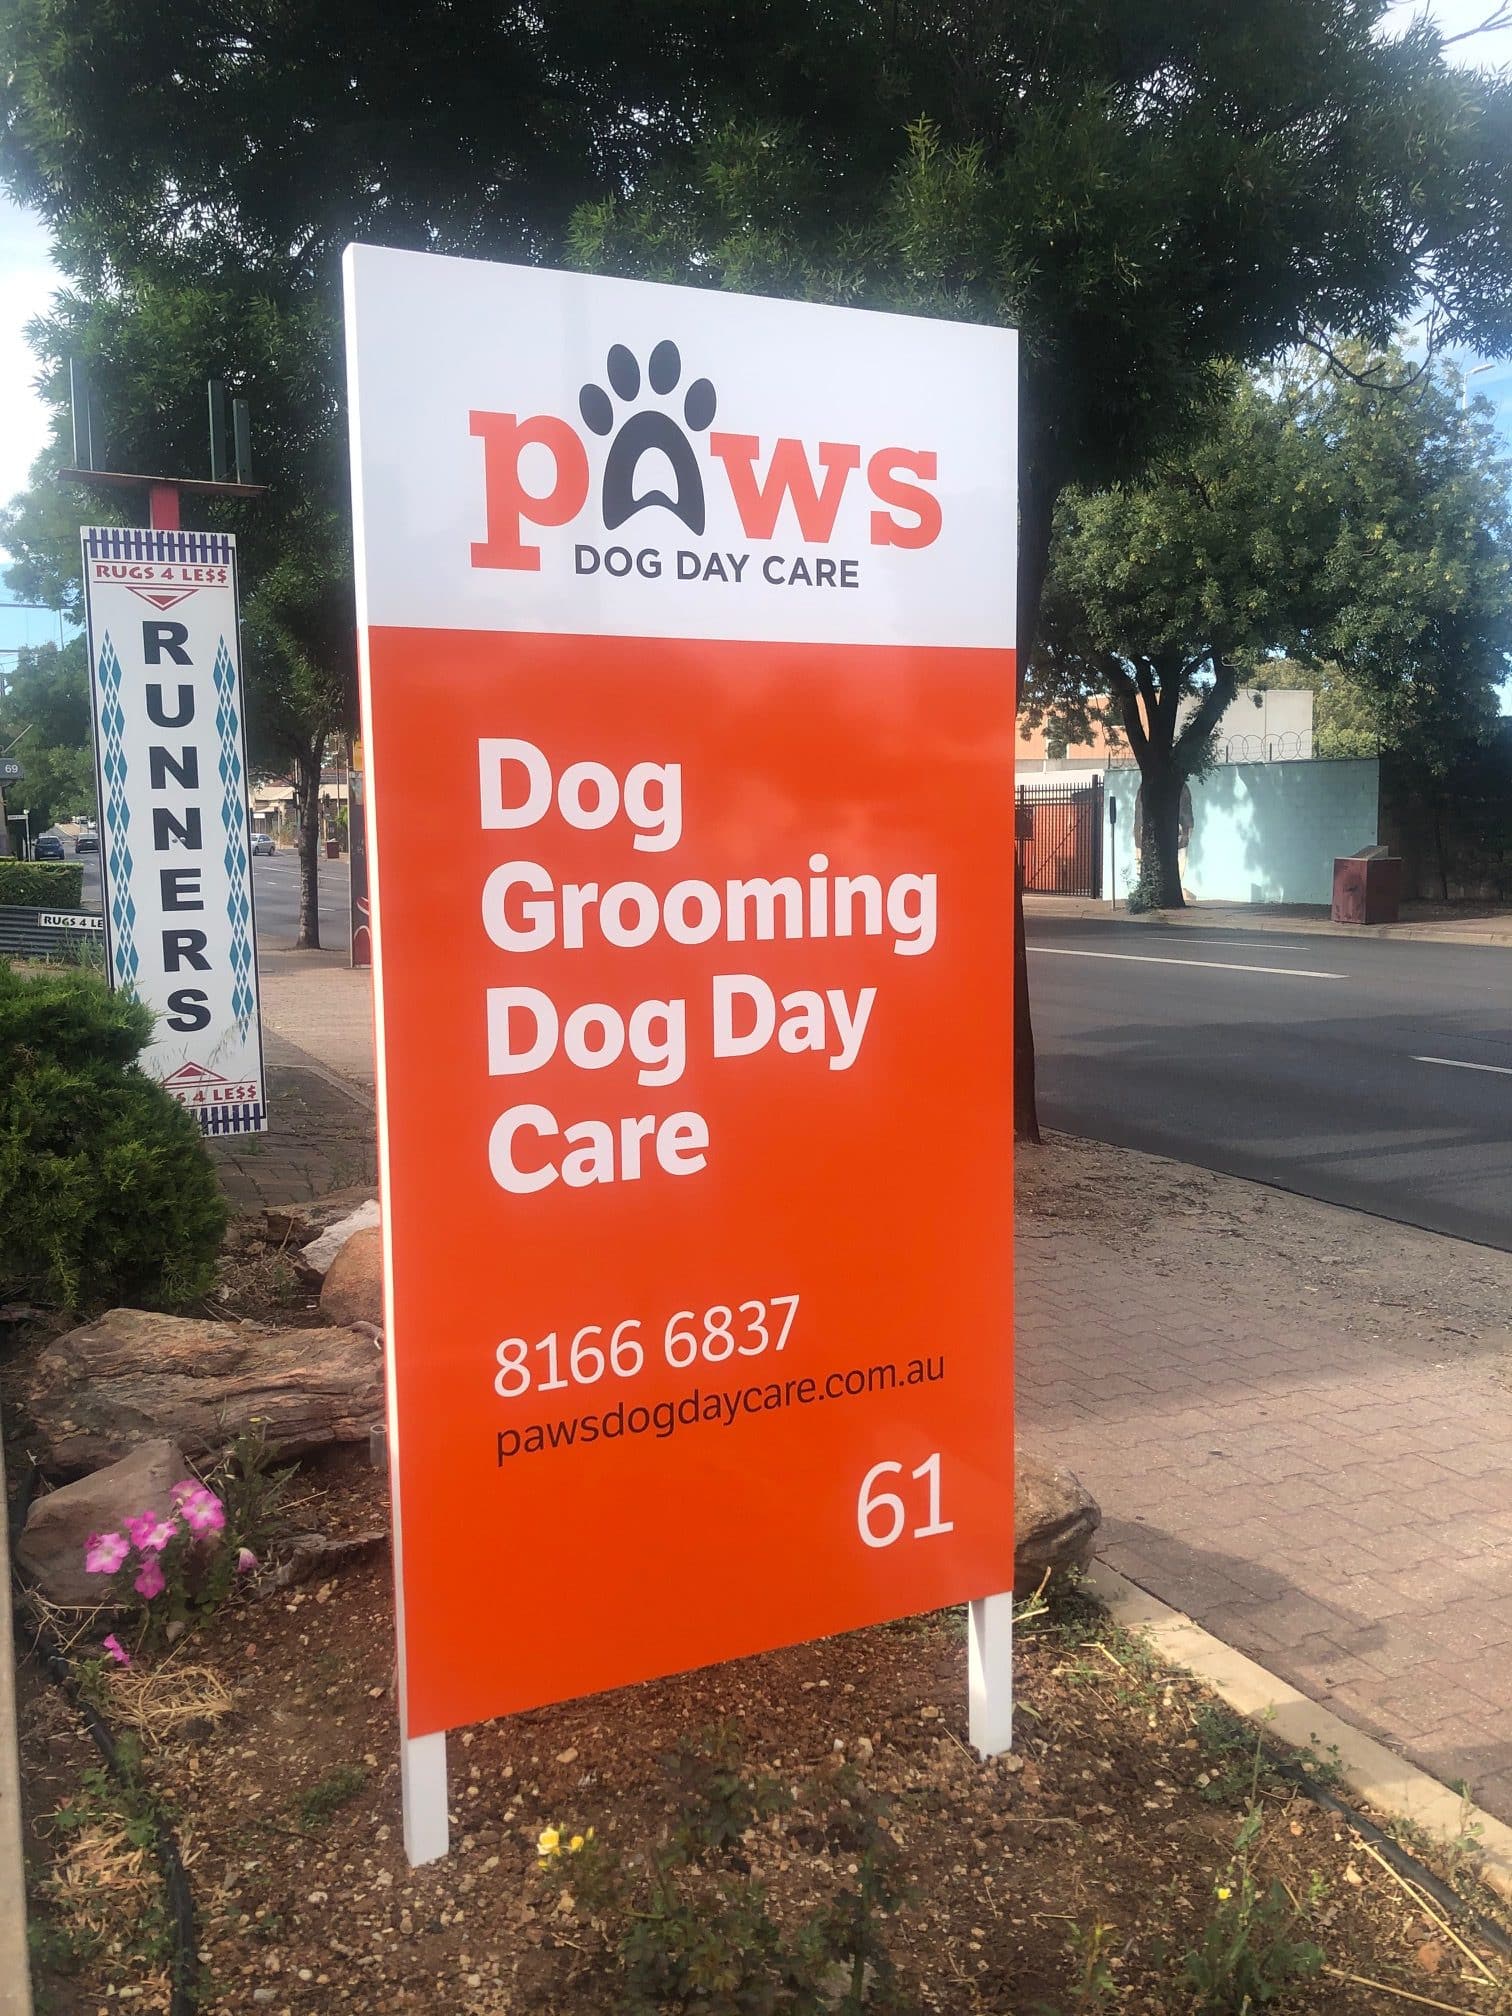 Paws Dog Day Care